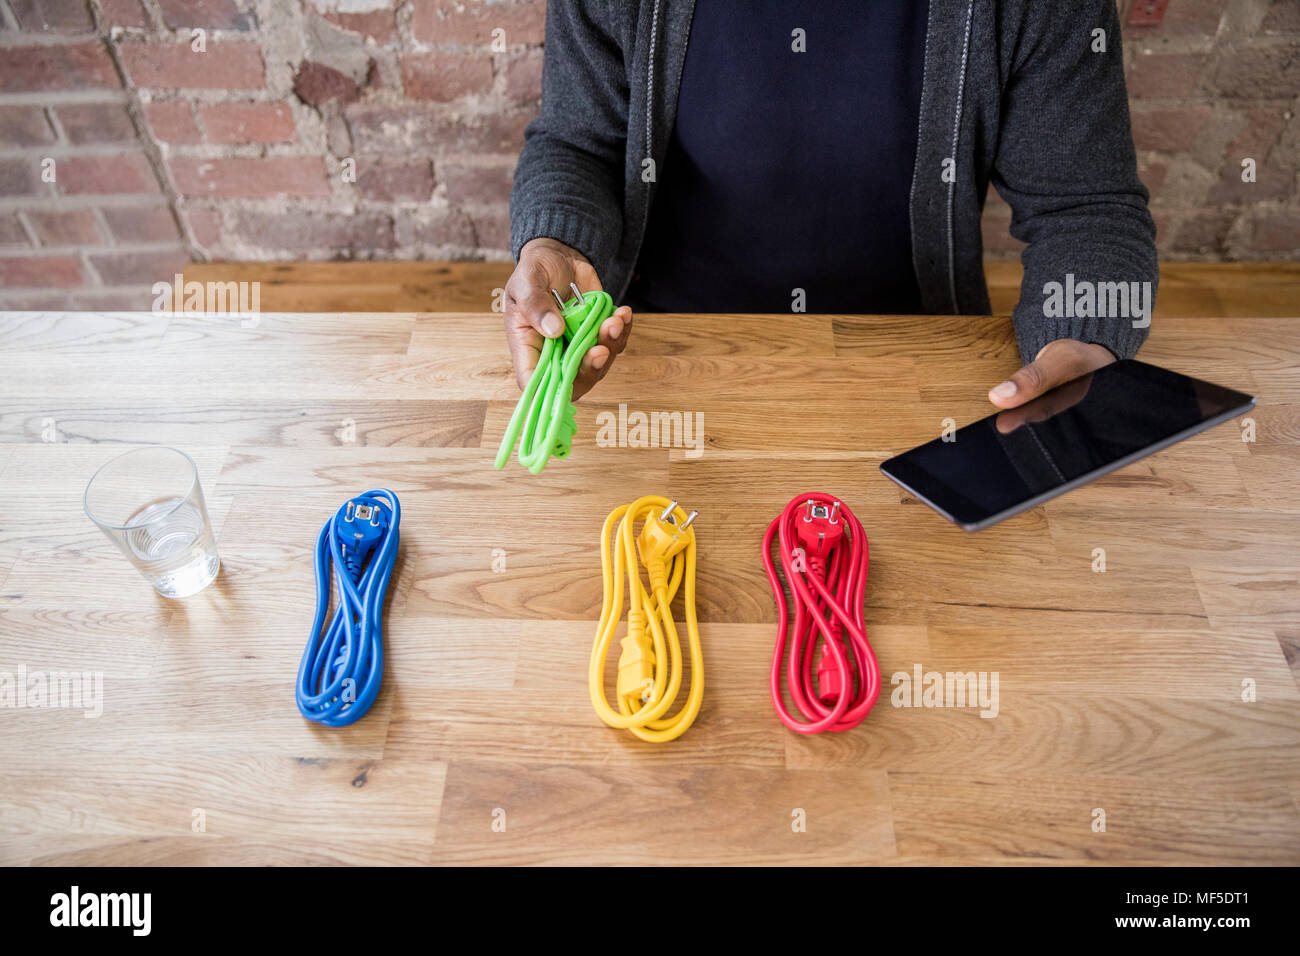 Businessman with tablet choosing from coloured power cables on table top, partial view Stock Photo